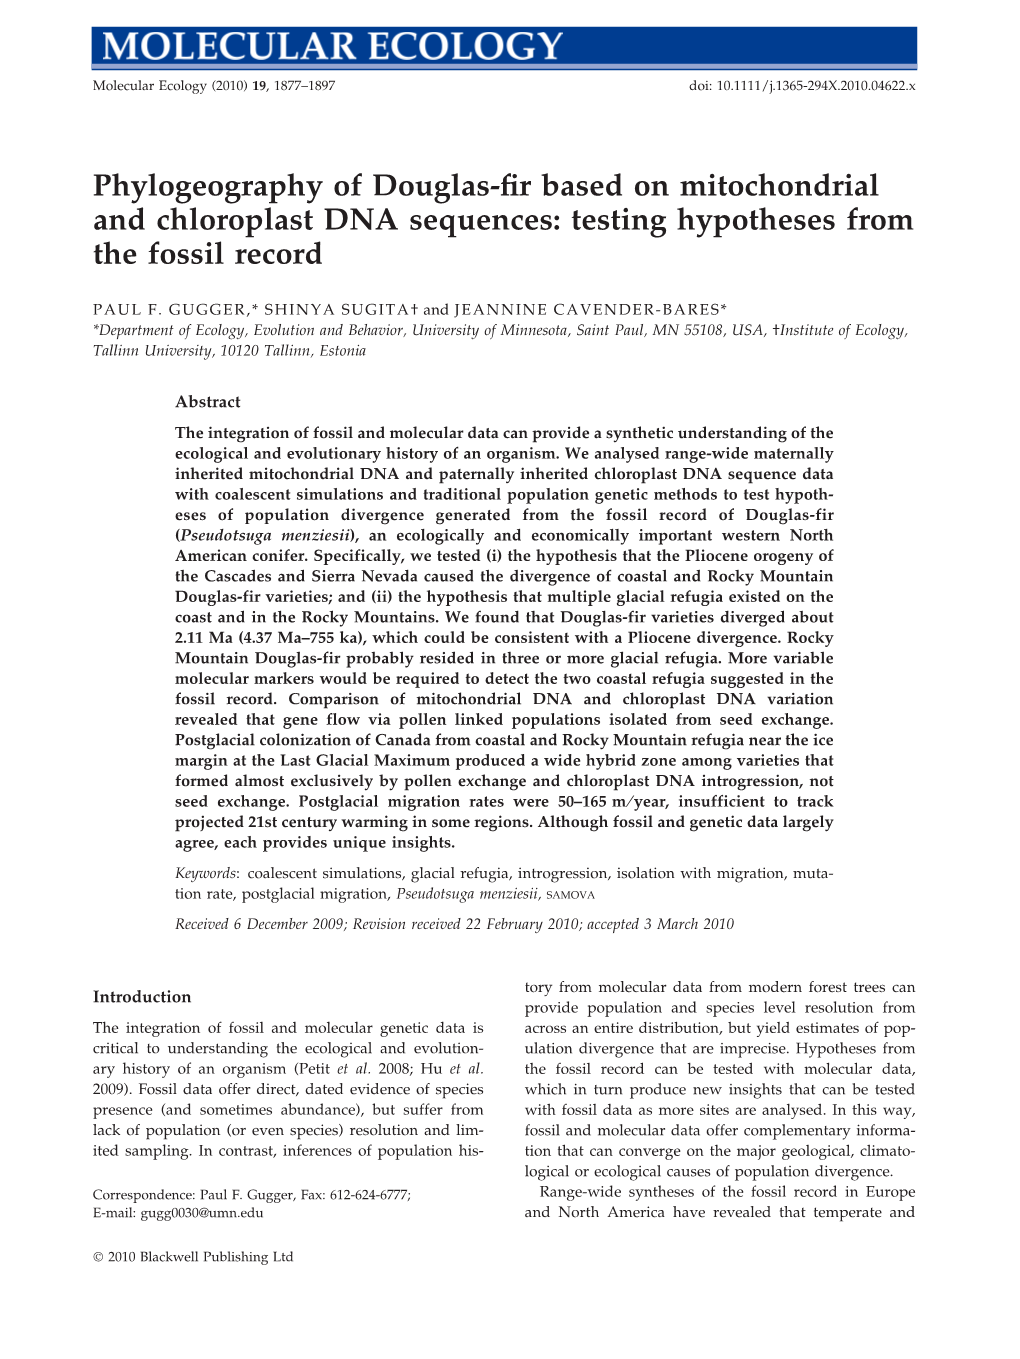 Phylogeography of Douglas-Fir Based on Mitochondrial and Chloroplast DNA Sequences: Testing Hypotheses from the Fossil Record